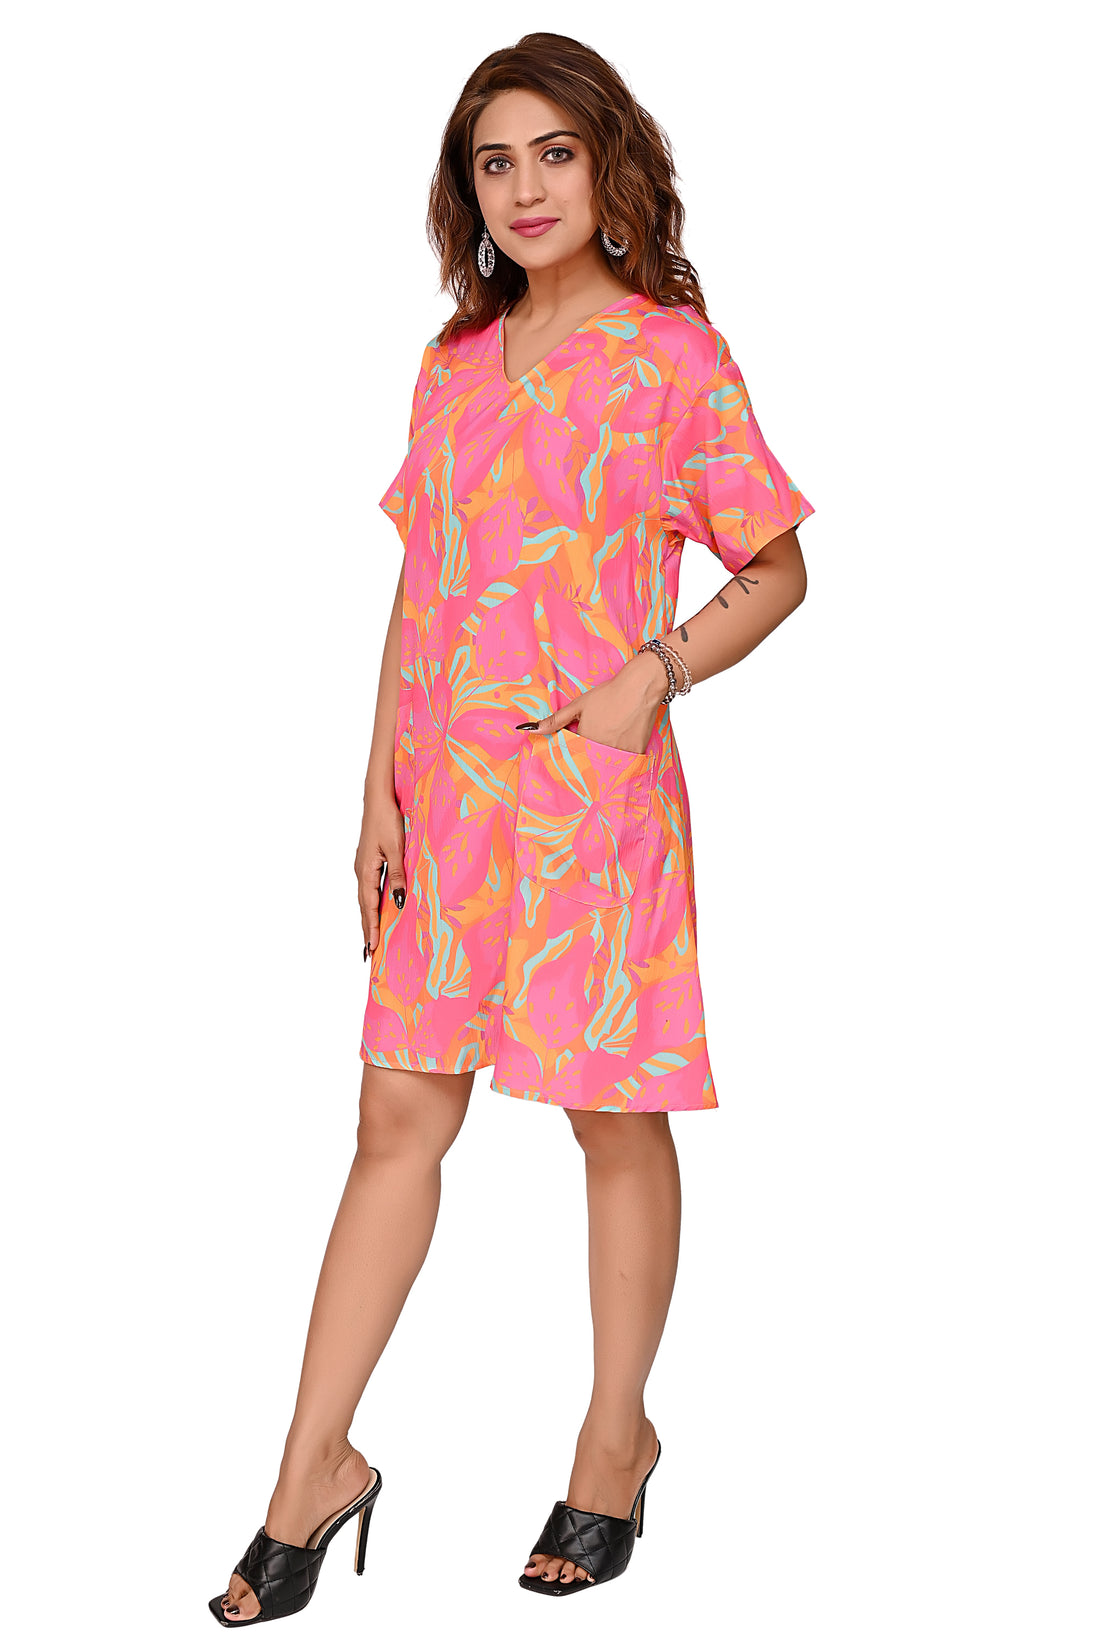 Nirmal online Premium Quality Digital Printed Tunic for Women in Pink Colour